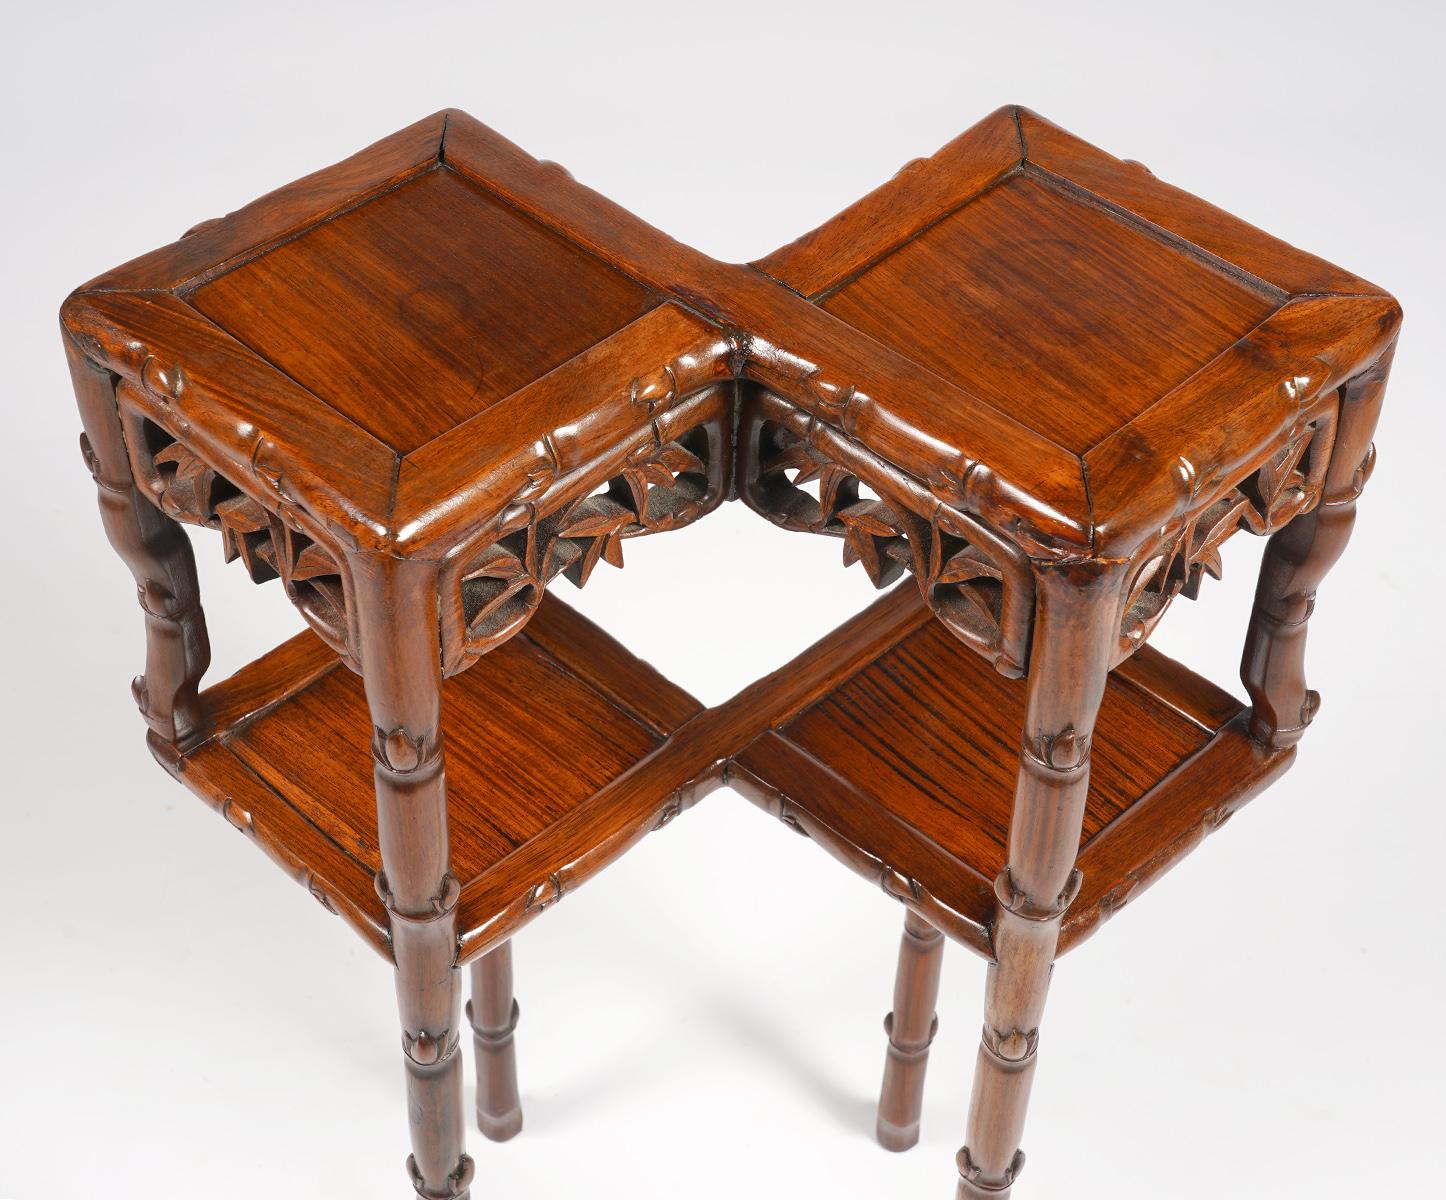 This rarely seen Chinese Hung Mu wood two top stand or table, dating to the late 19th century, features two joined square panel tops above carved open work friezes and a lower similar tier resting on legs carved in the style of bamboo small sprigs.